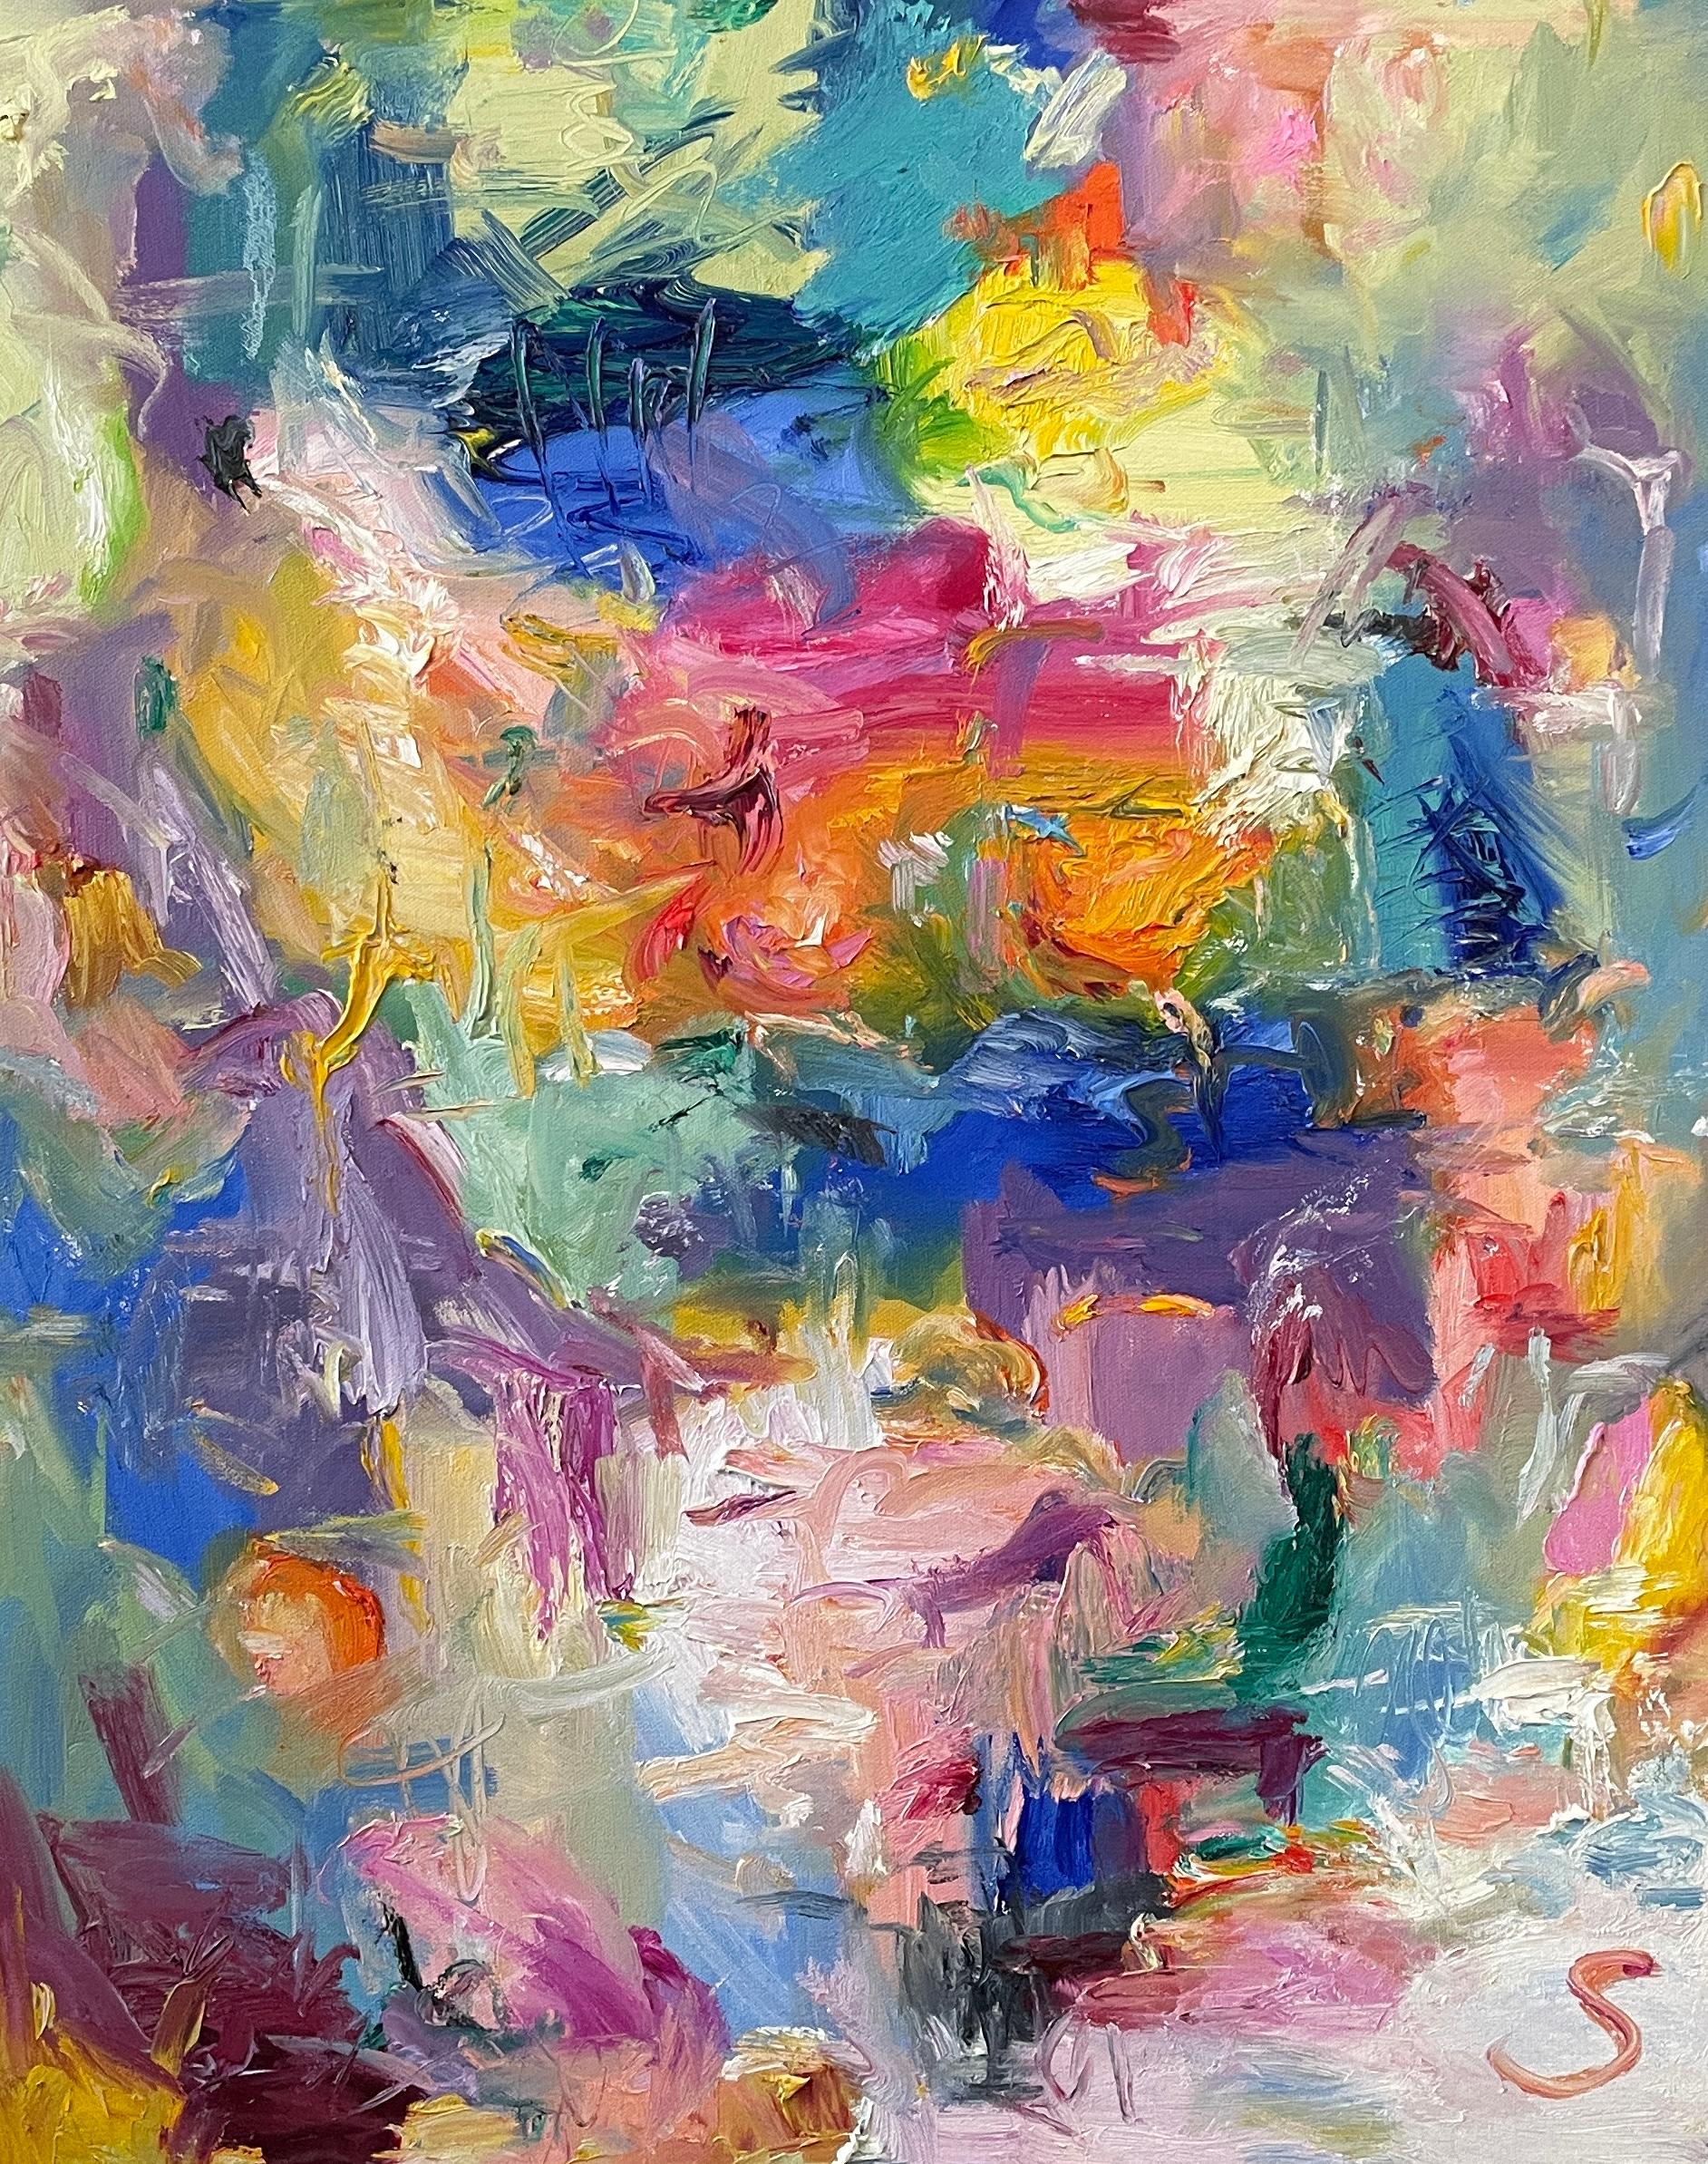 "Bright Future" by Sveta Hessler is a captivating 30" x 24" oil on canvas masterpiece that invites viewers into a world of vibrant and mesmerizing color. The canvas is alive with a riot of hues, from sunlit yellows and deep magentas to cooling blues